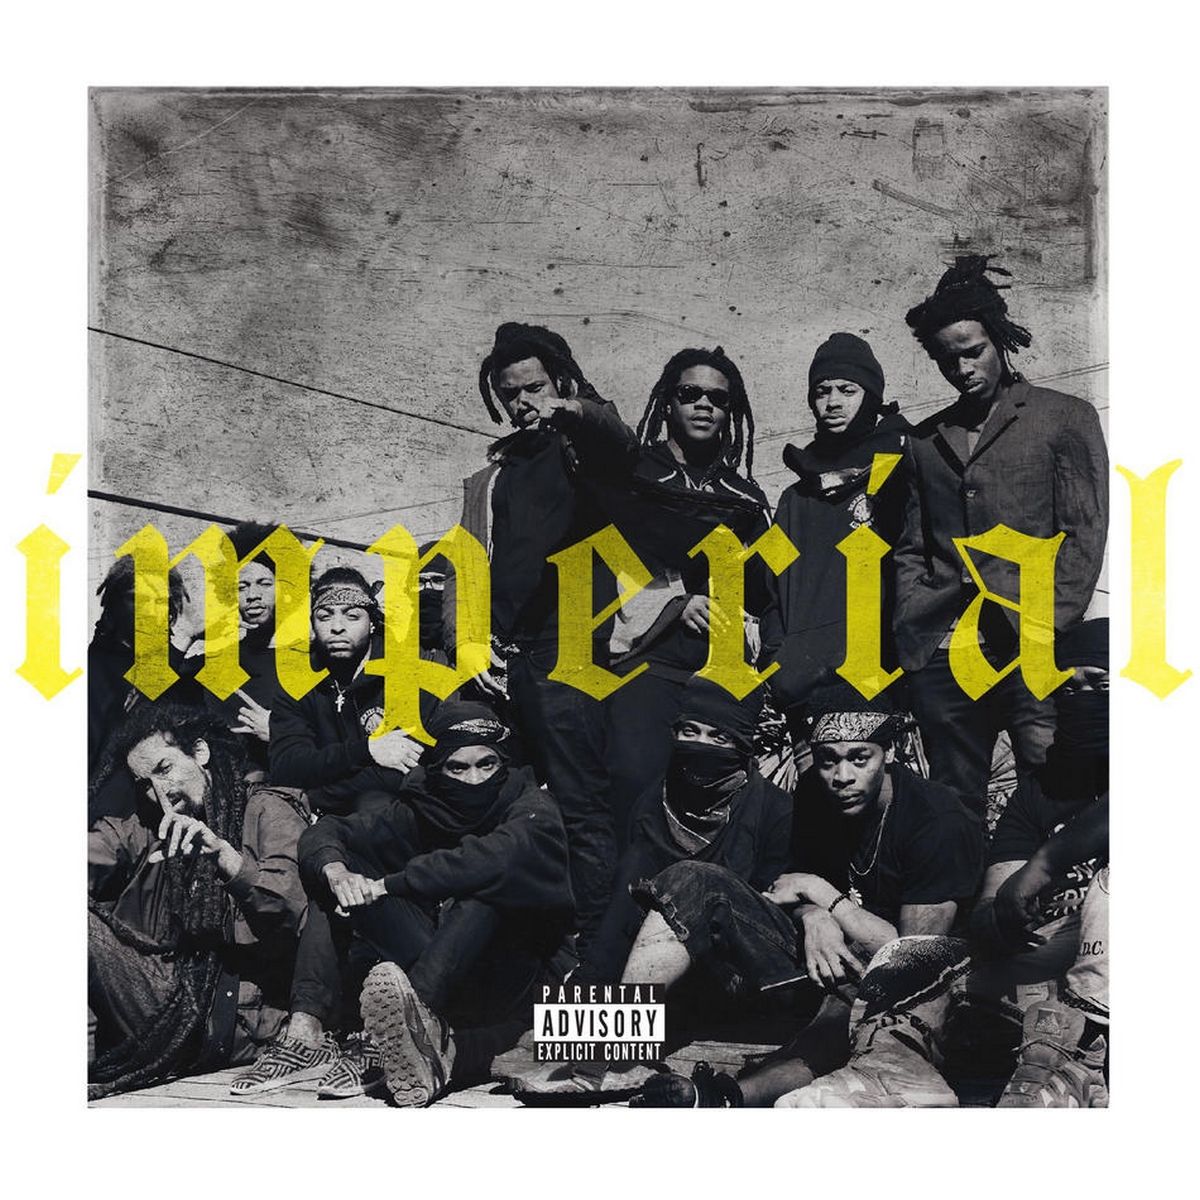 Imperial Denzel Curry Download Wallpapers